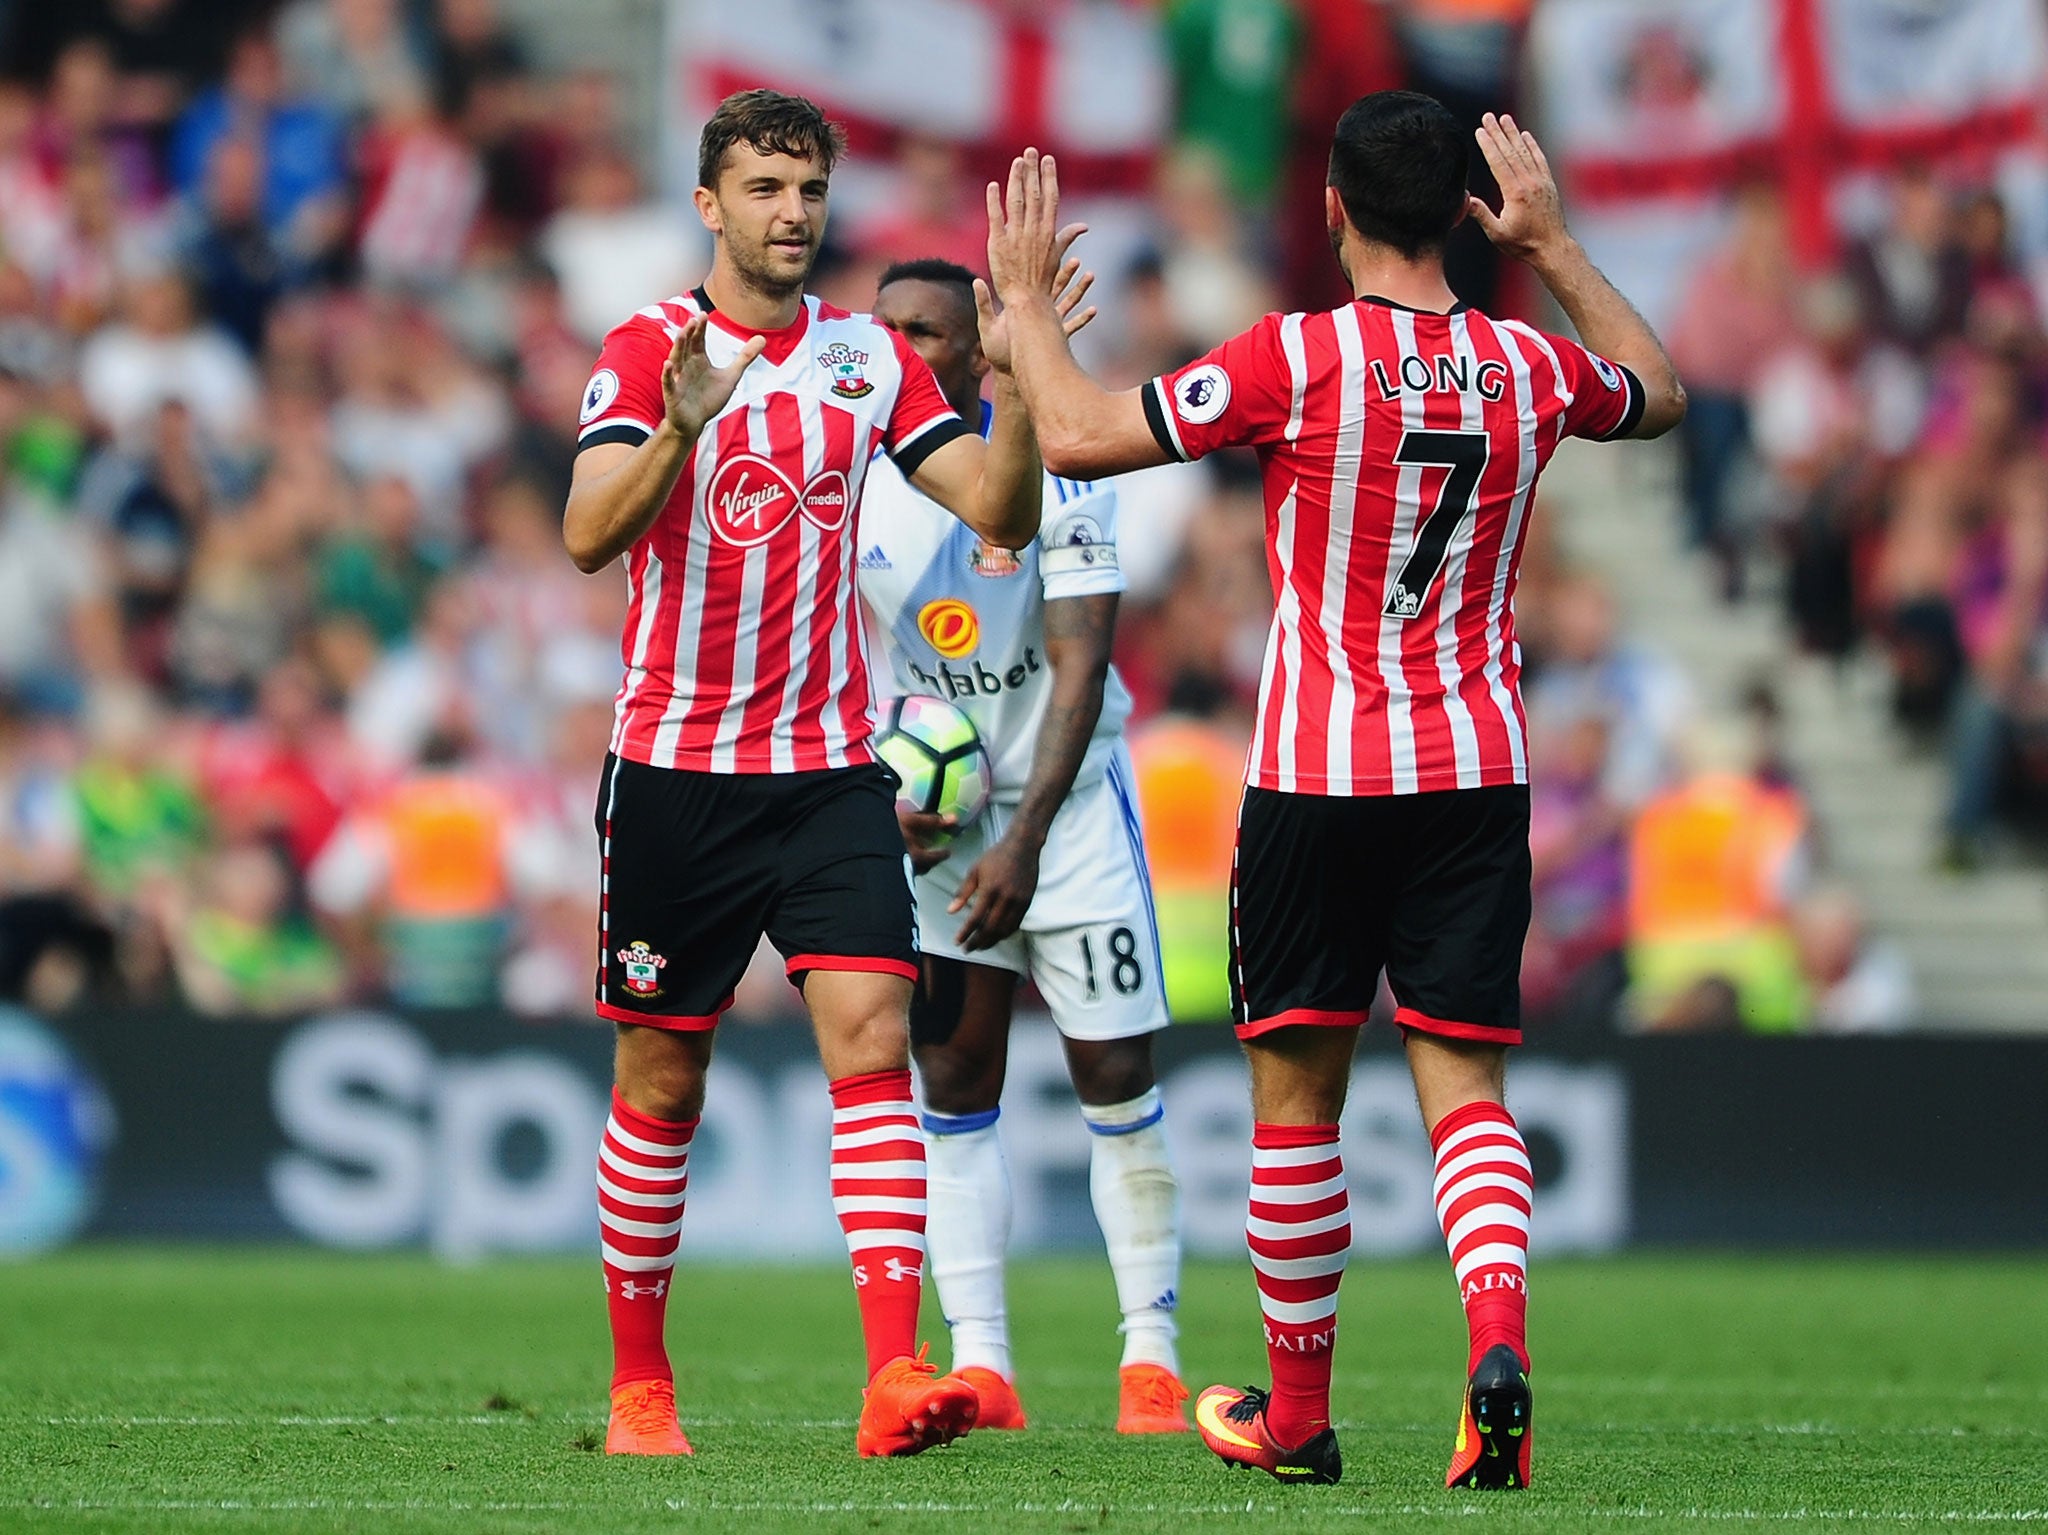 Jay Rodriguez grabbed a late goal to equalise for Southampton